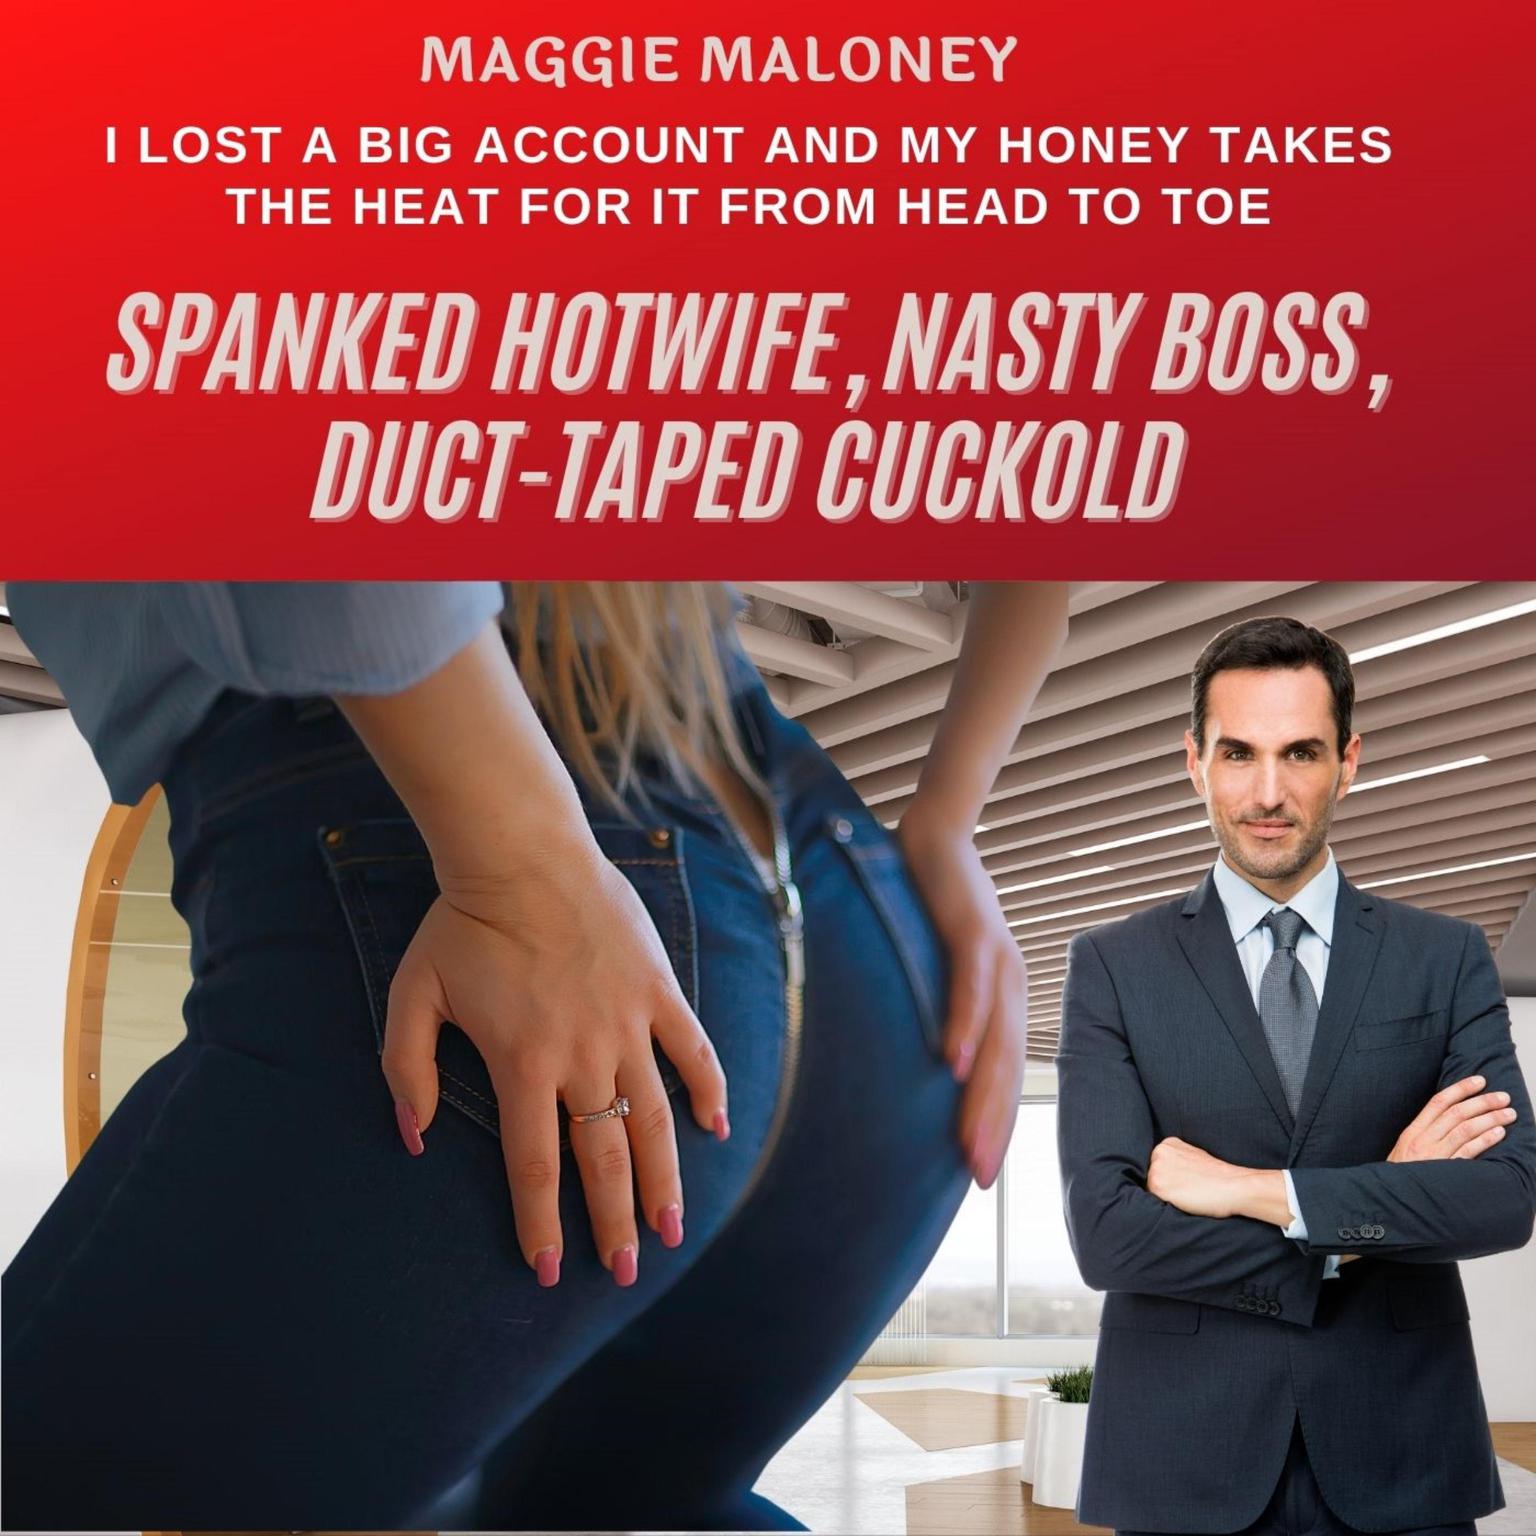 Spanked Hotwife, Nasty Boss, Duct-Taped Cuckold: I Lost a Big Account and My Honey Takes the Heat for It from Head to Toe Audiobook, by Maggie Maloney